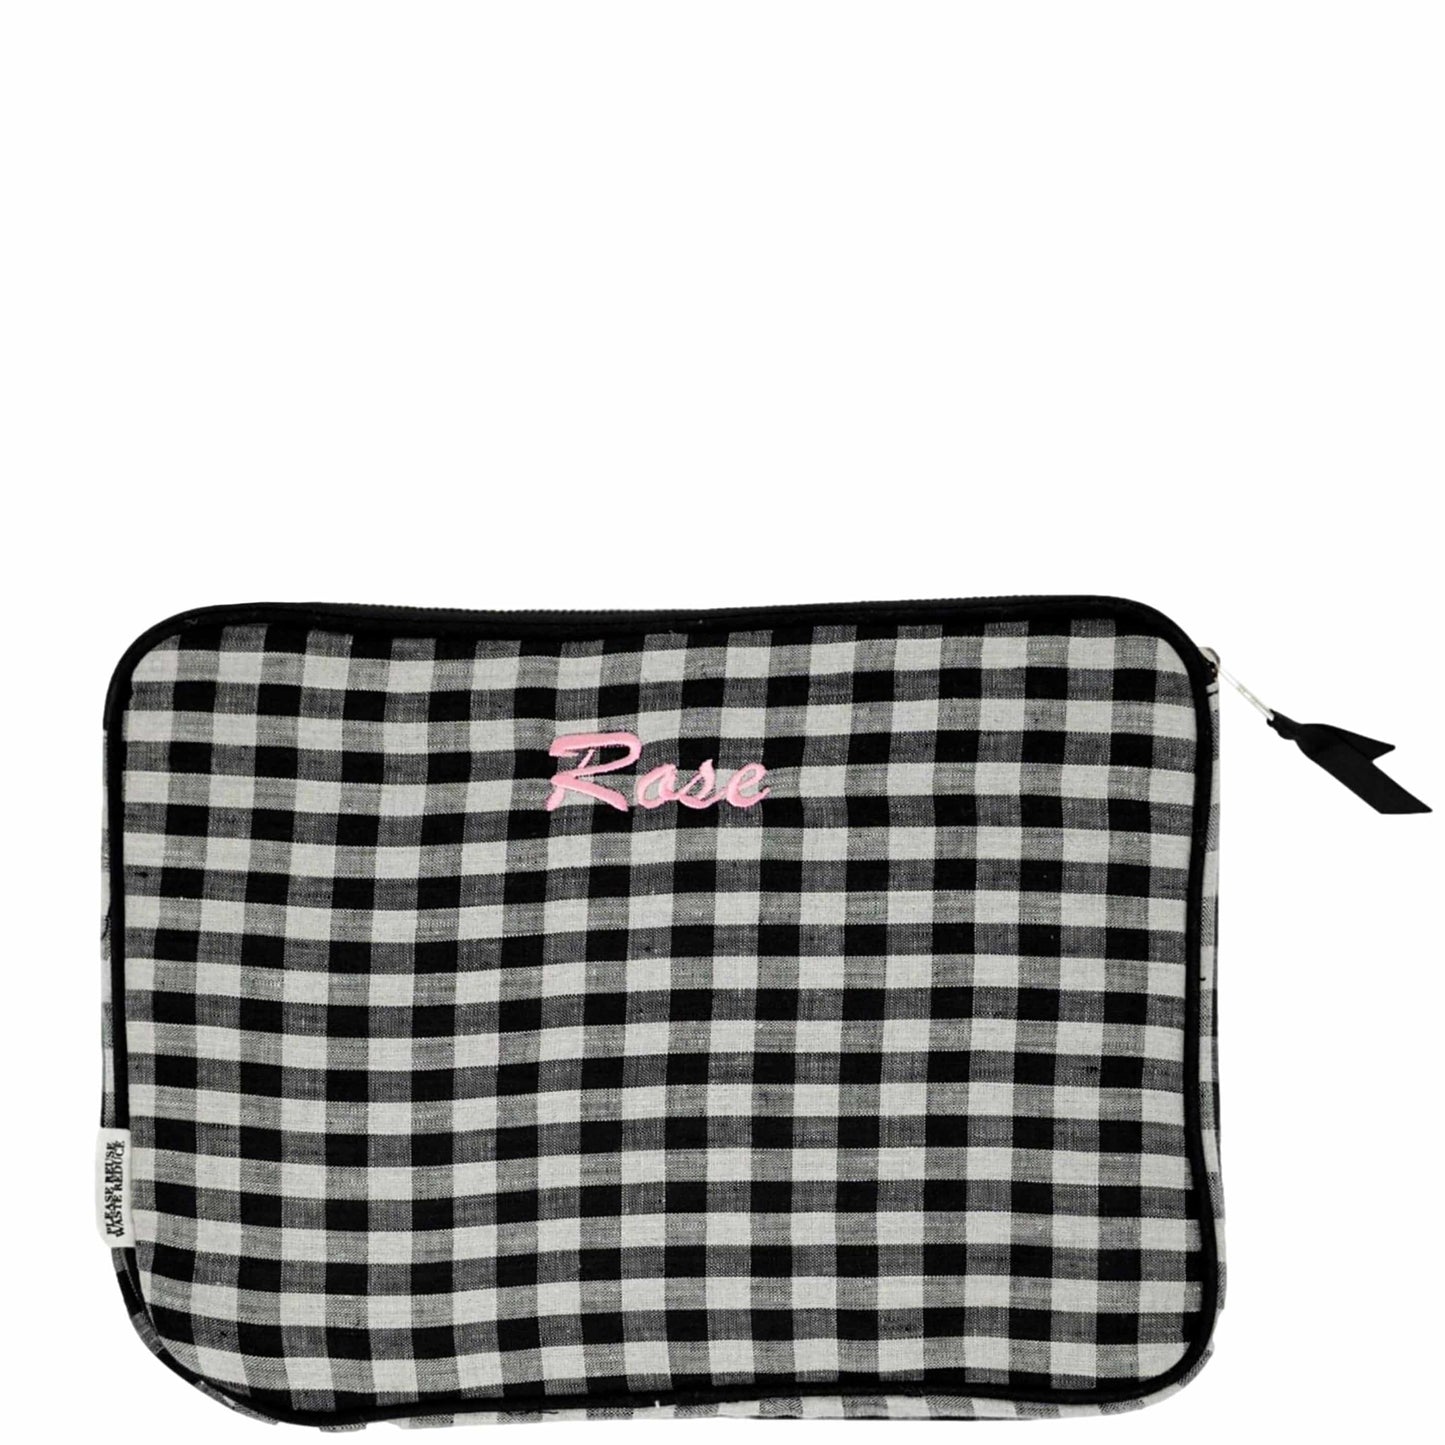 Custom Laptop Sleeve Case with Charger Pocket Small Gingham